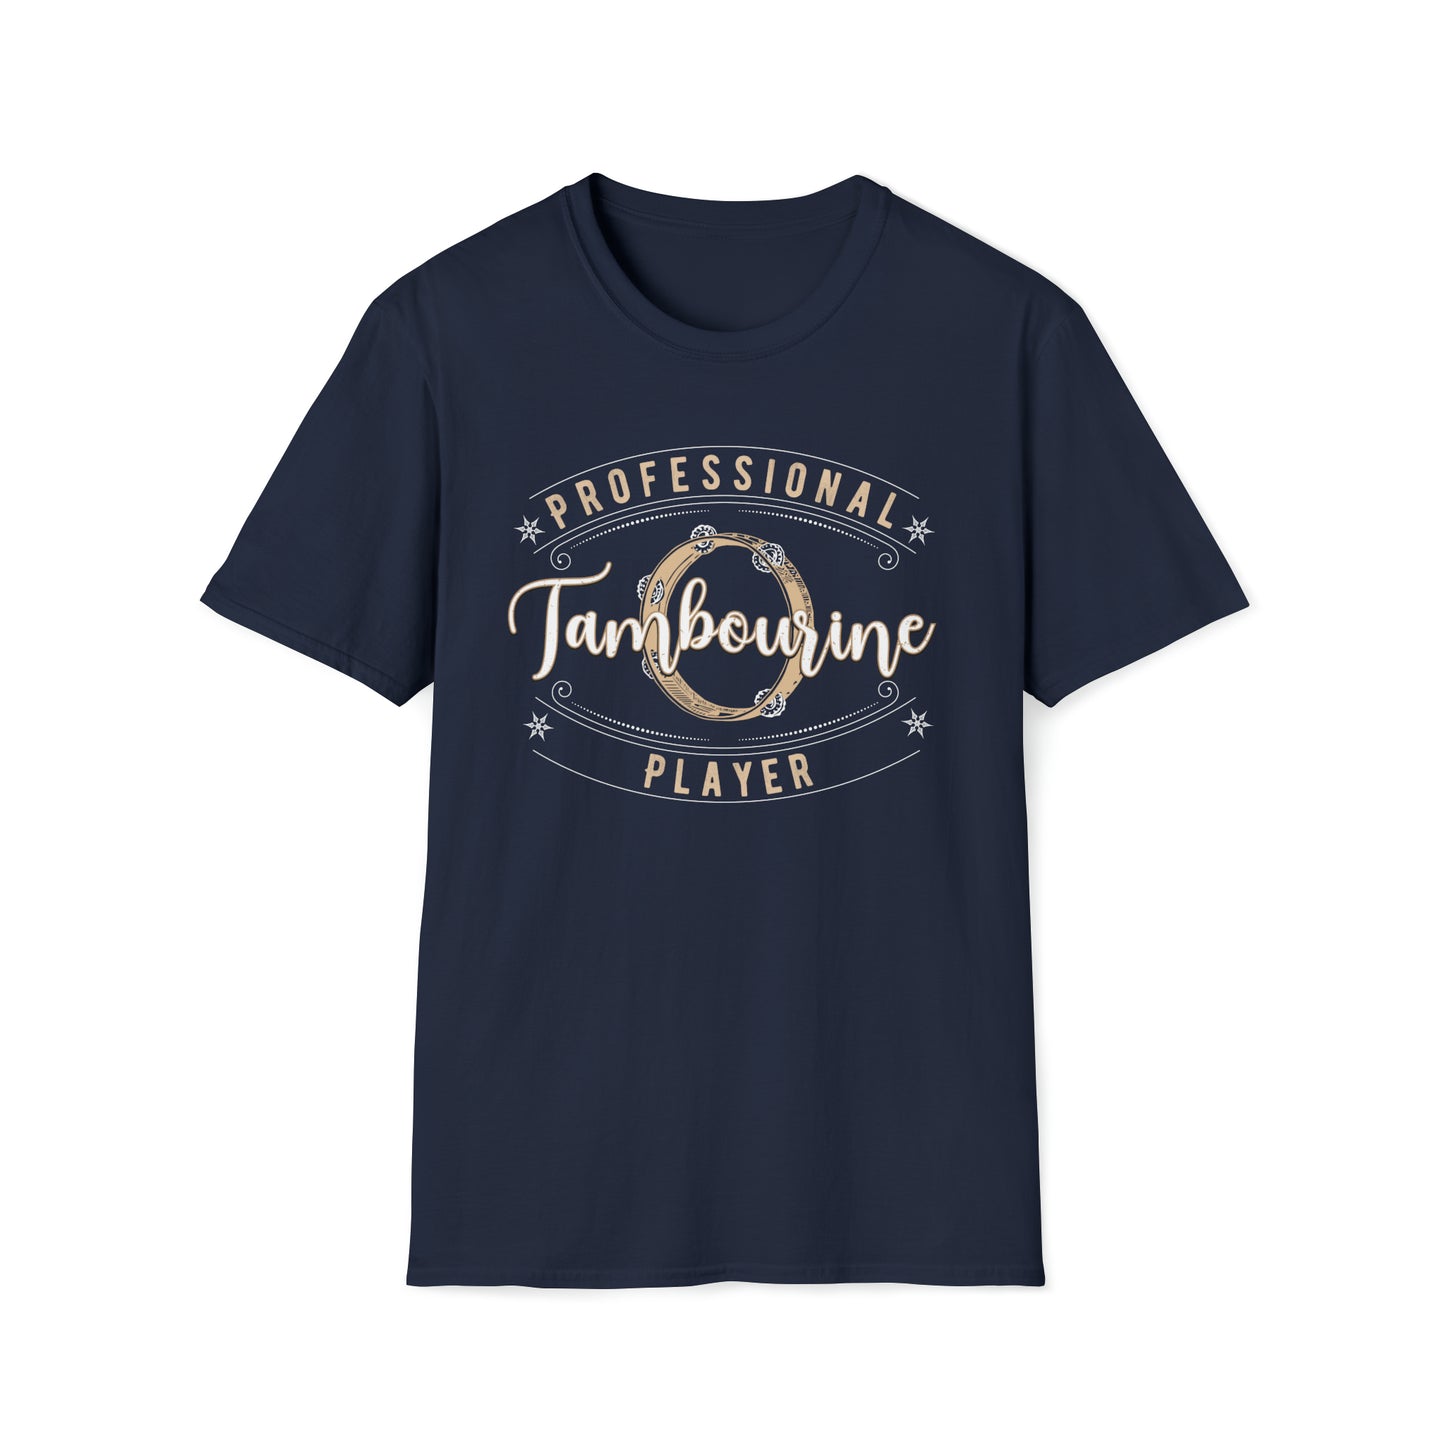 Professional Tambourine Player, Softstyle Gildan T-Shirt, Unisex, Dark Colors, Music Fan Gift, Musician Gift, Funny Gift for Percussionist